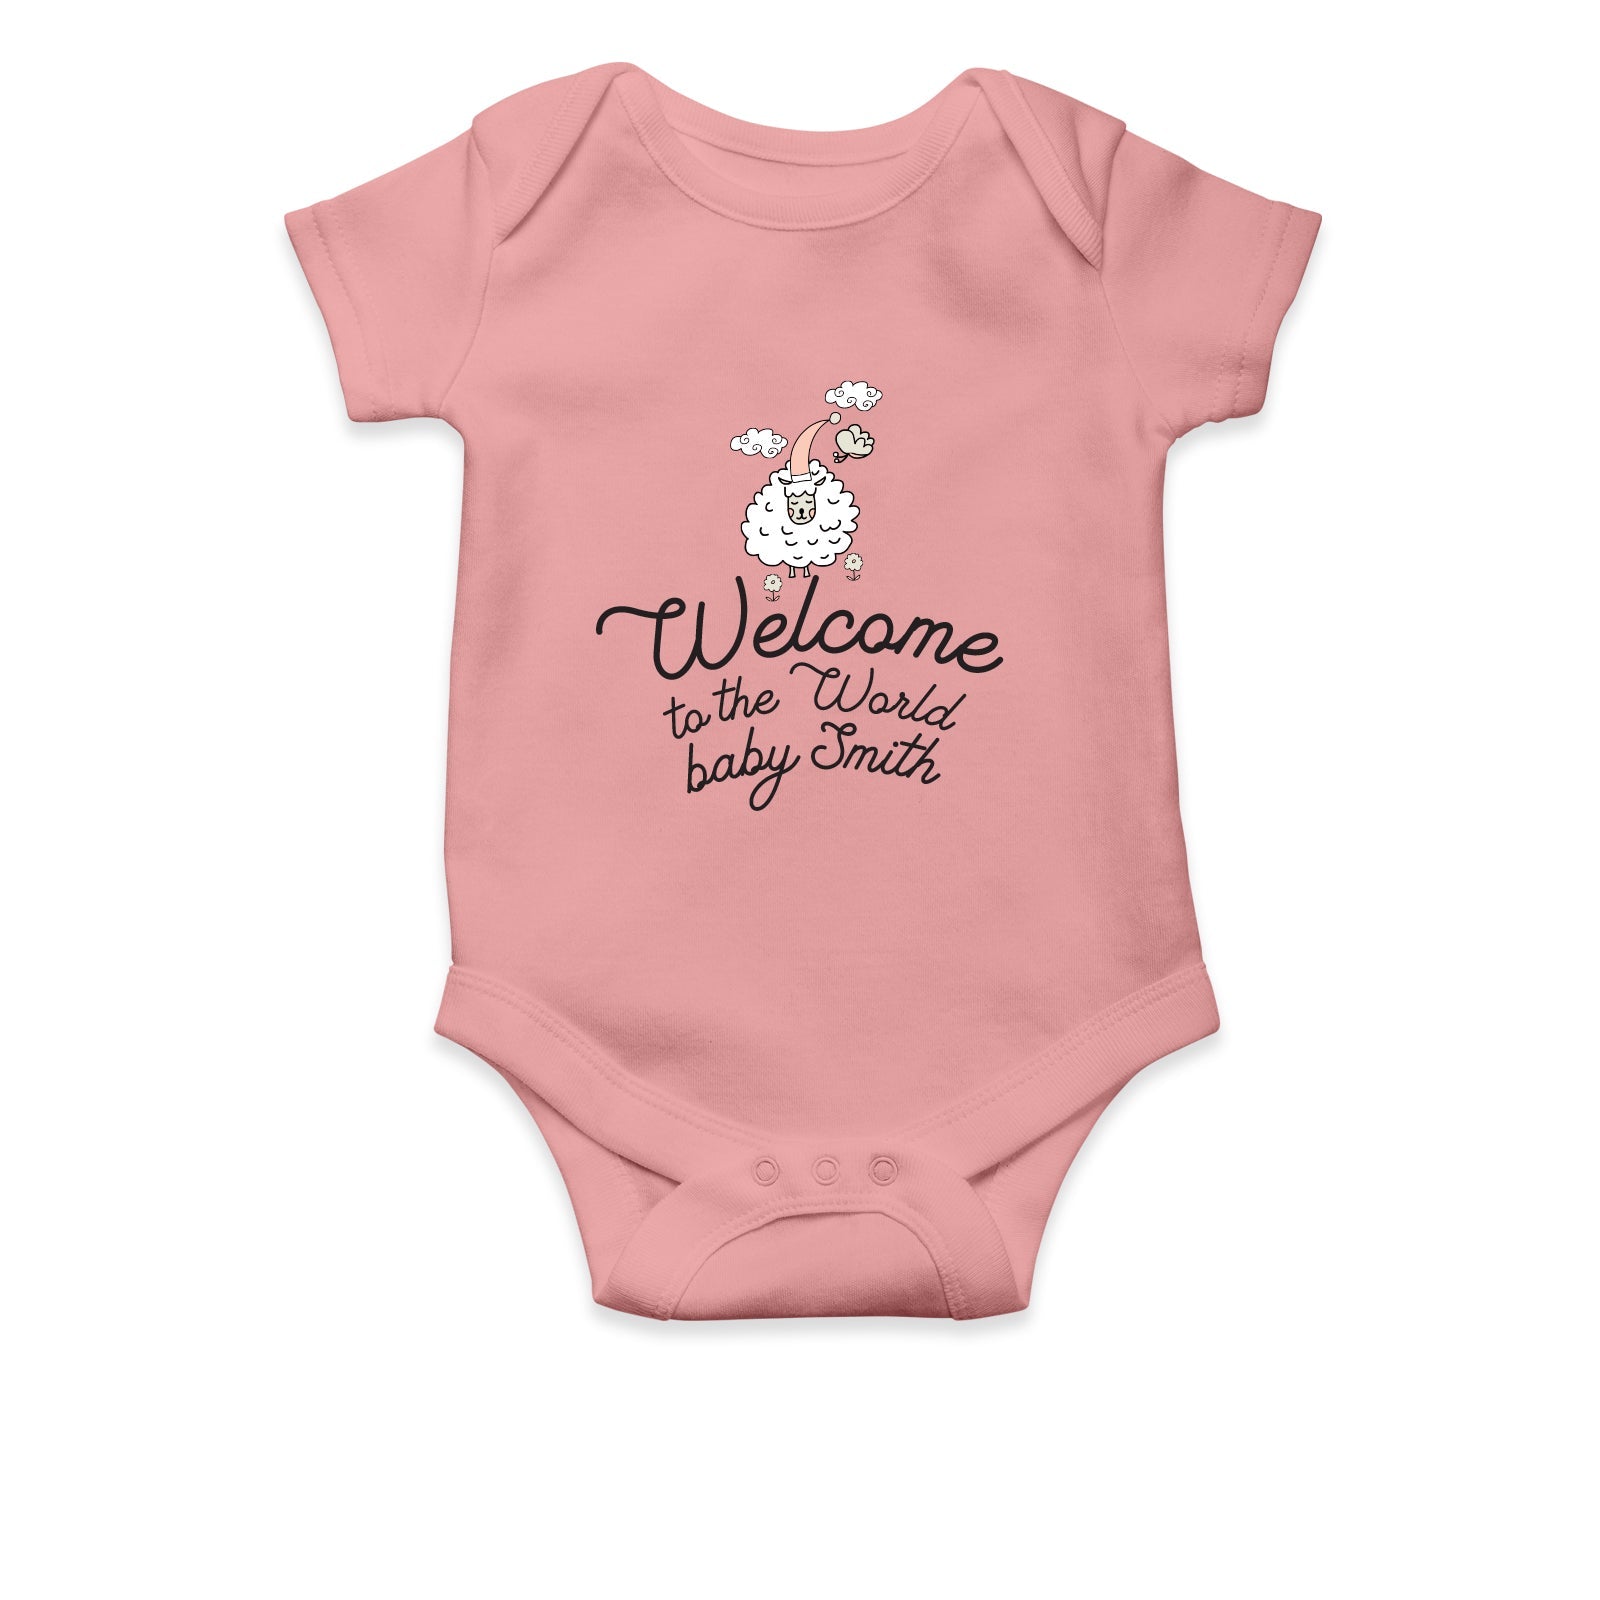 Personalised White Baby Body Suit Grow Vest - Sheep